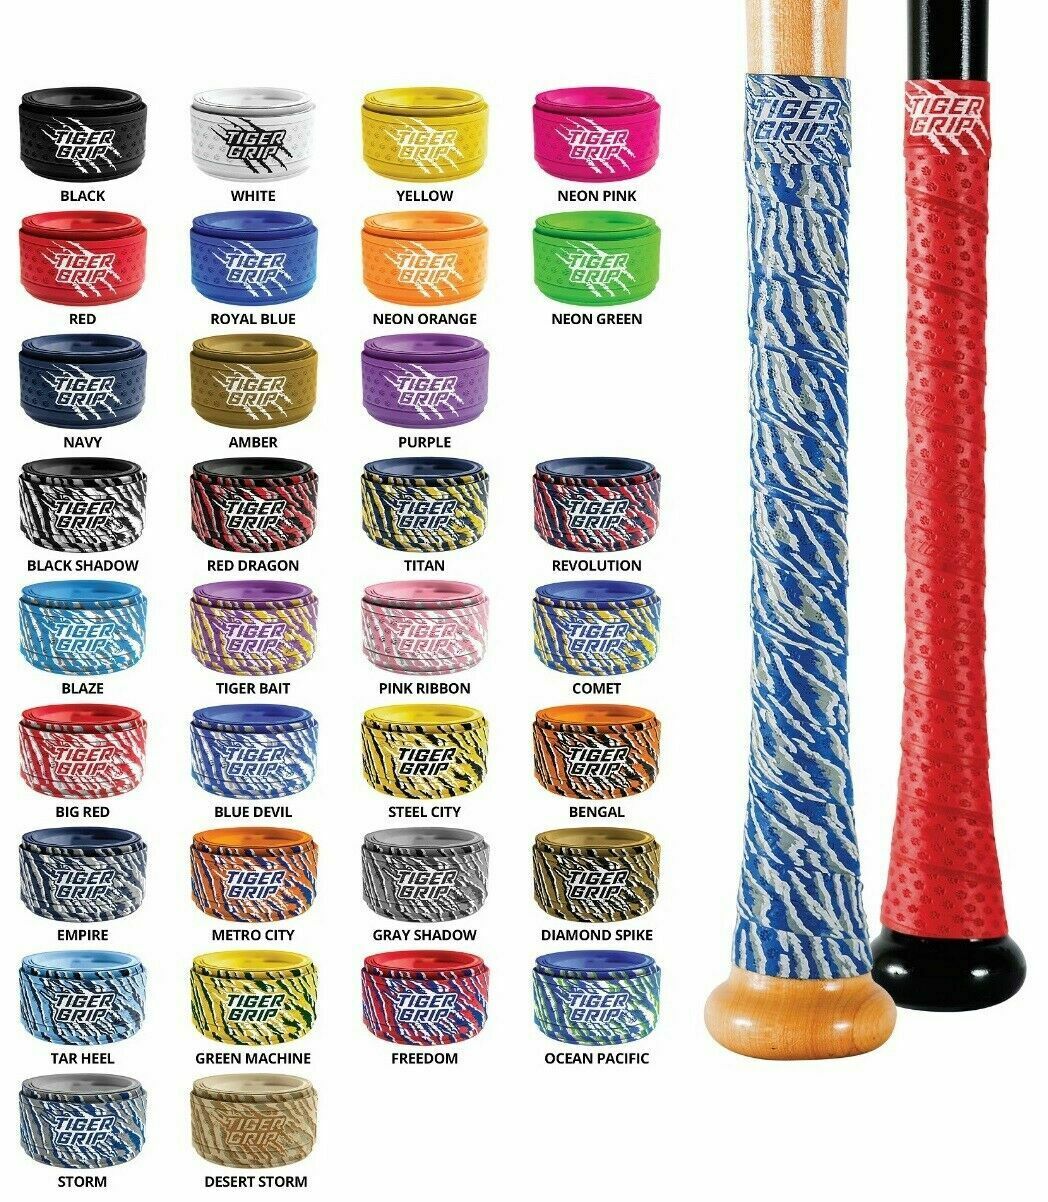 Tiger Grip Extreme Baseball Softball Bat Handle Sticky Grips Colored Wrap/tape